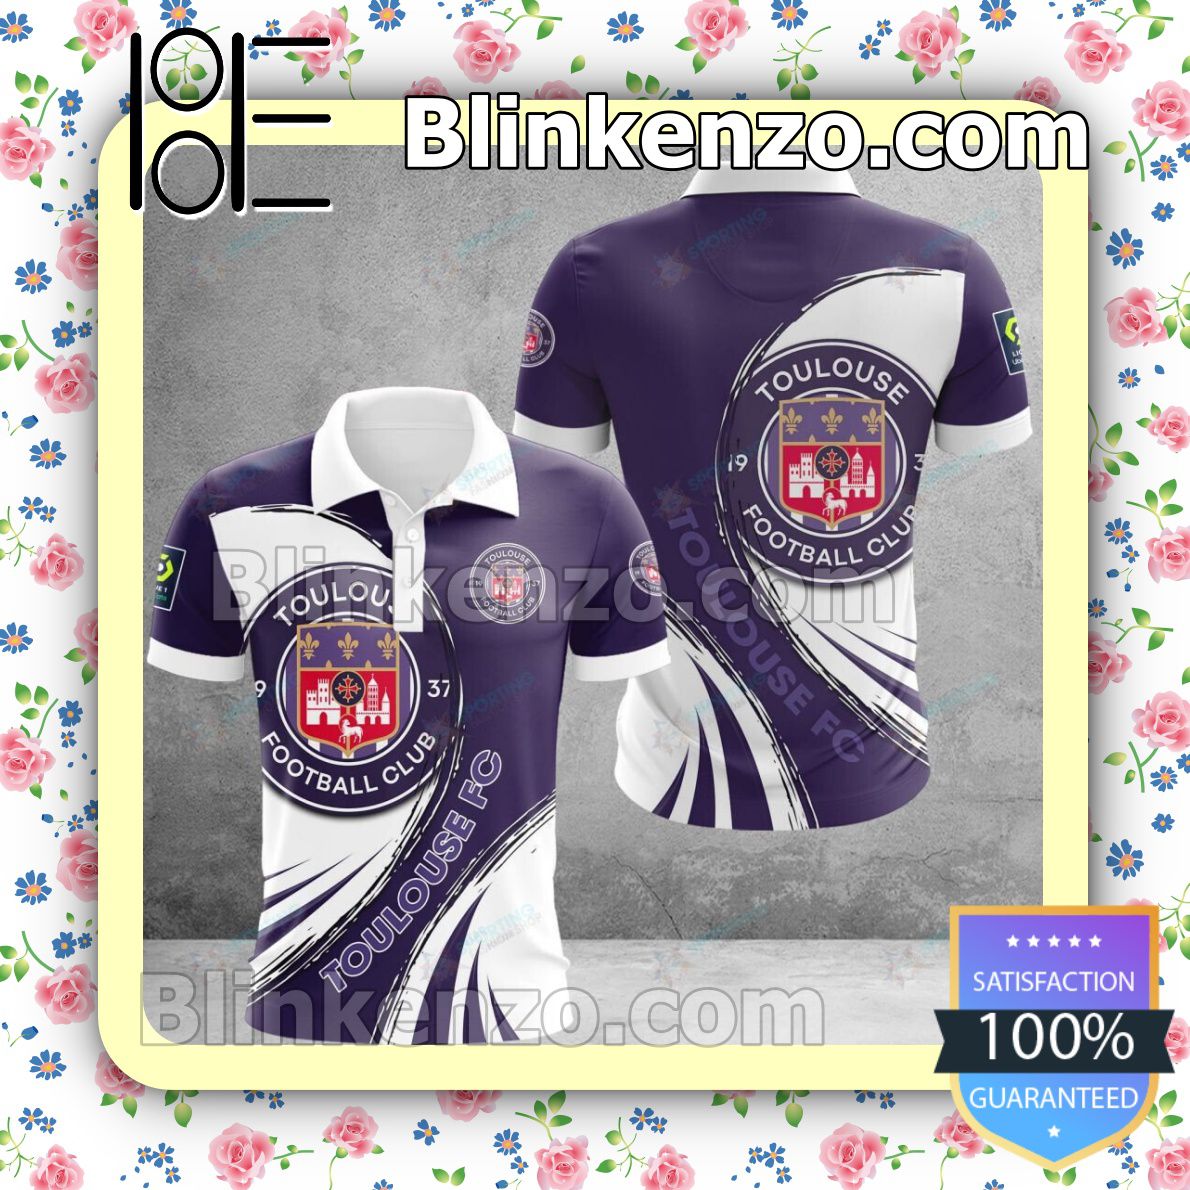 Toulouse Football Club T-shirt, Christmas Sweater